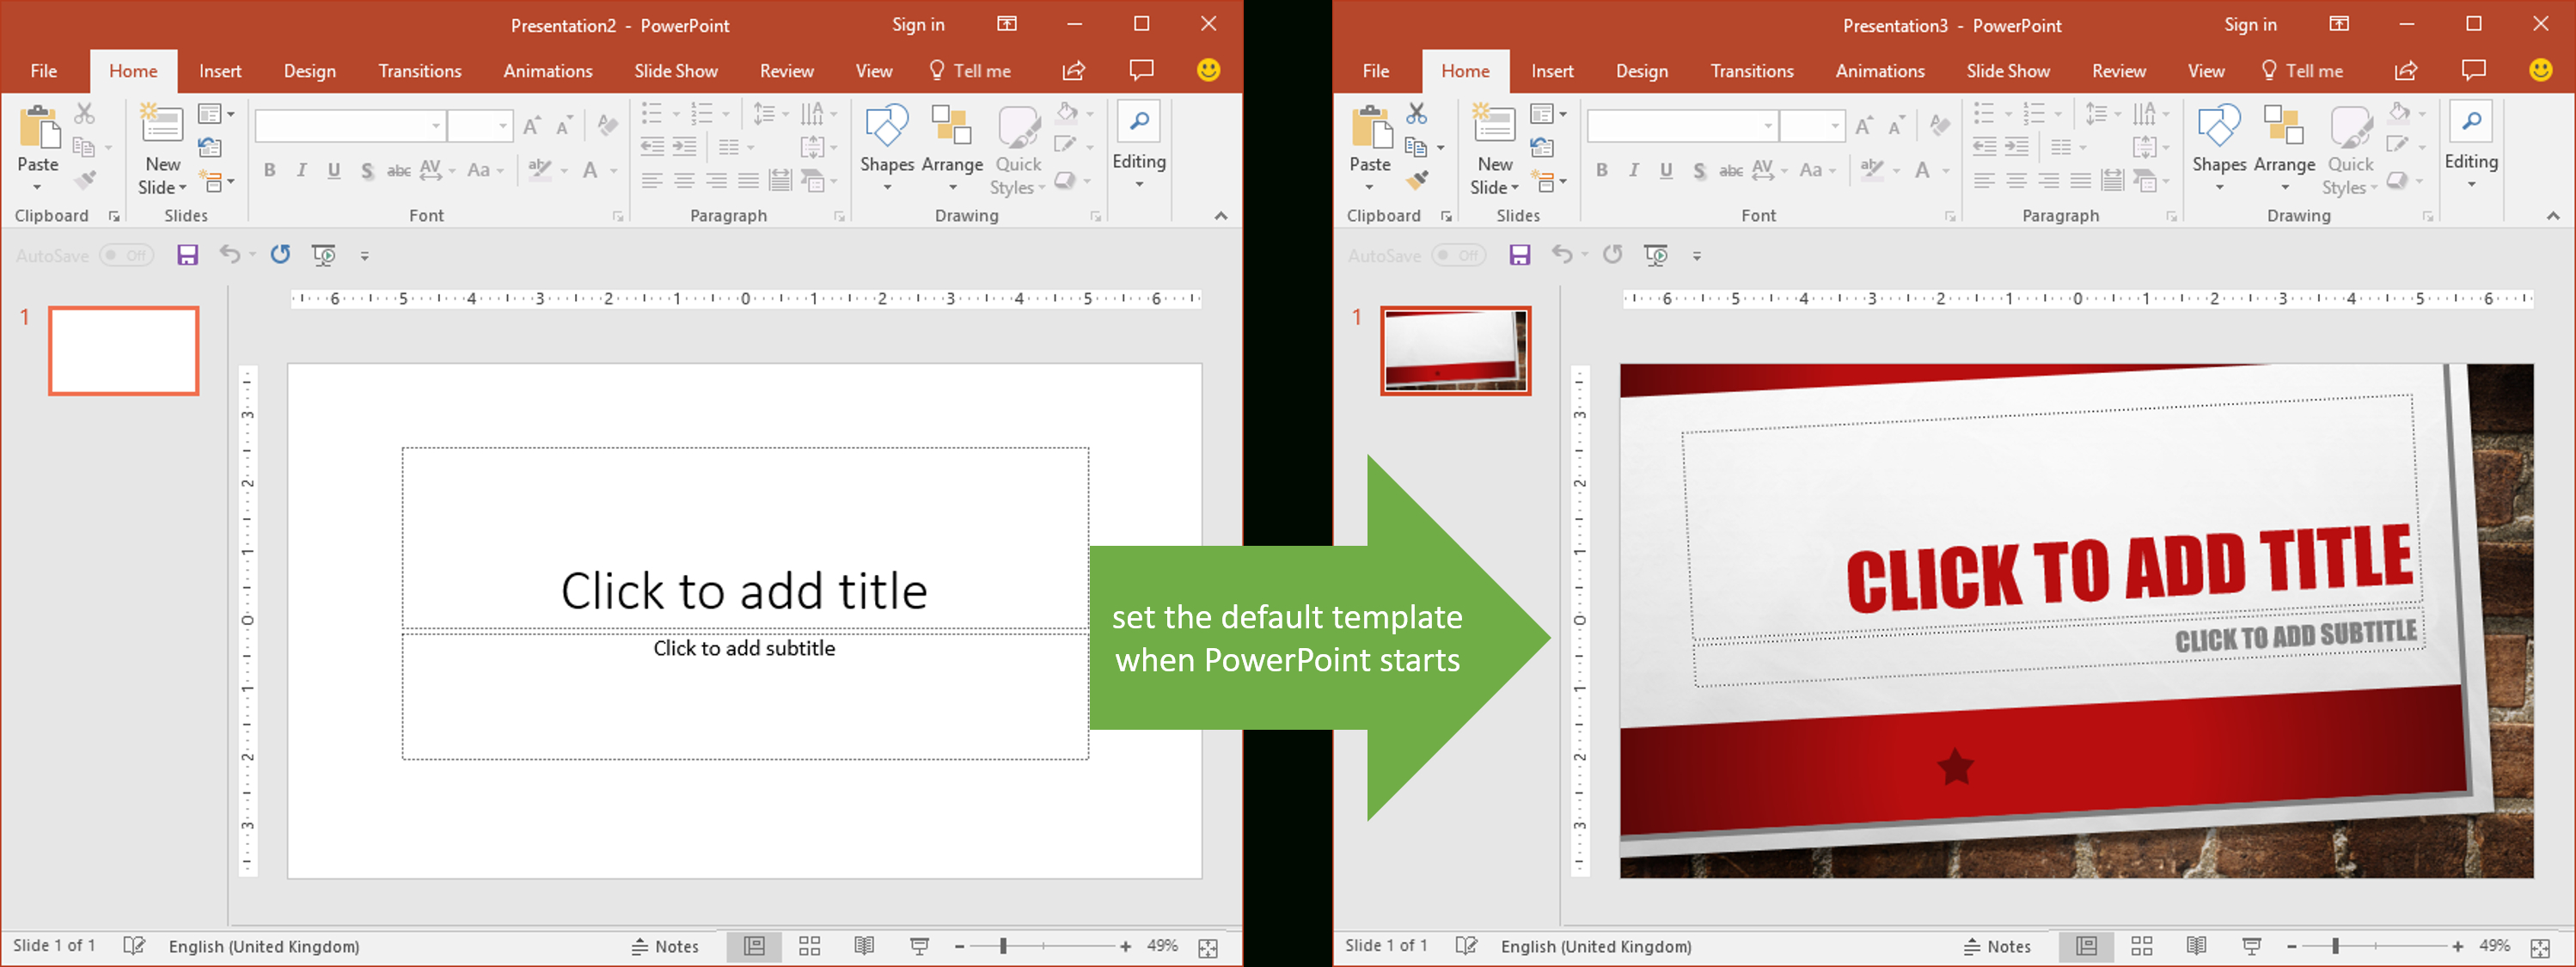 Set The Default Template When Powerpoint Starts | Youpresent Pertaining To Powerpoint 2013 Template Location